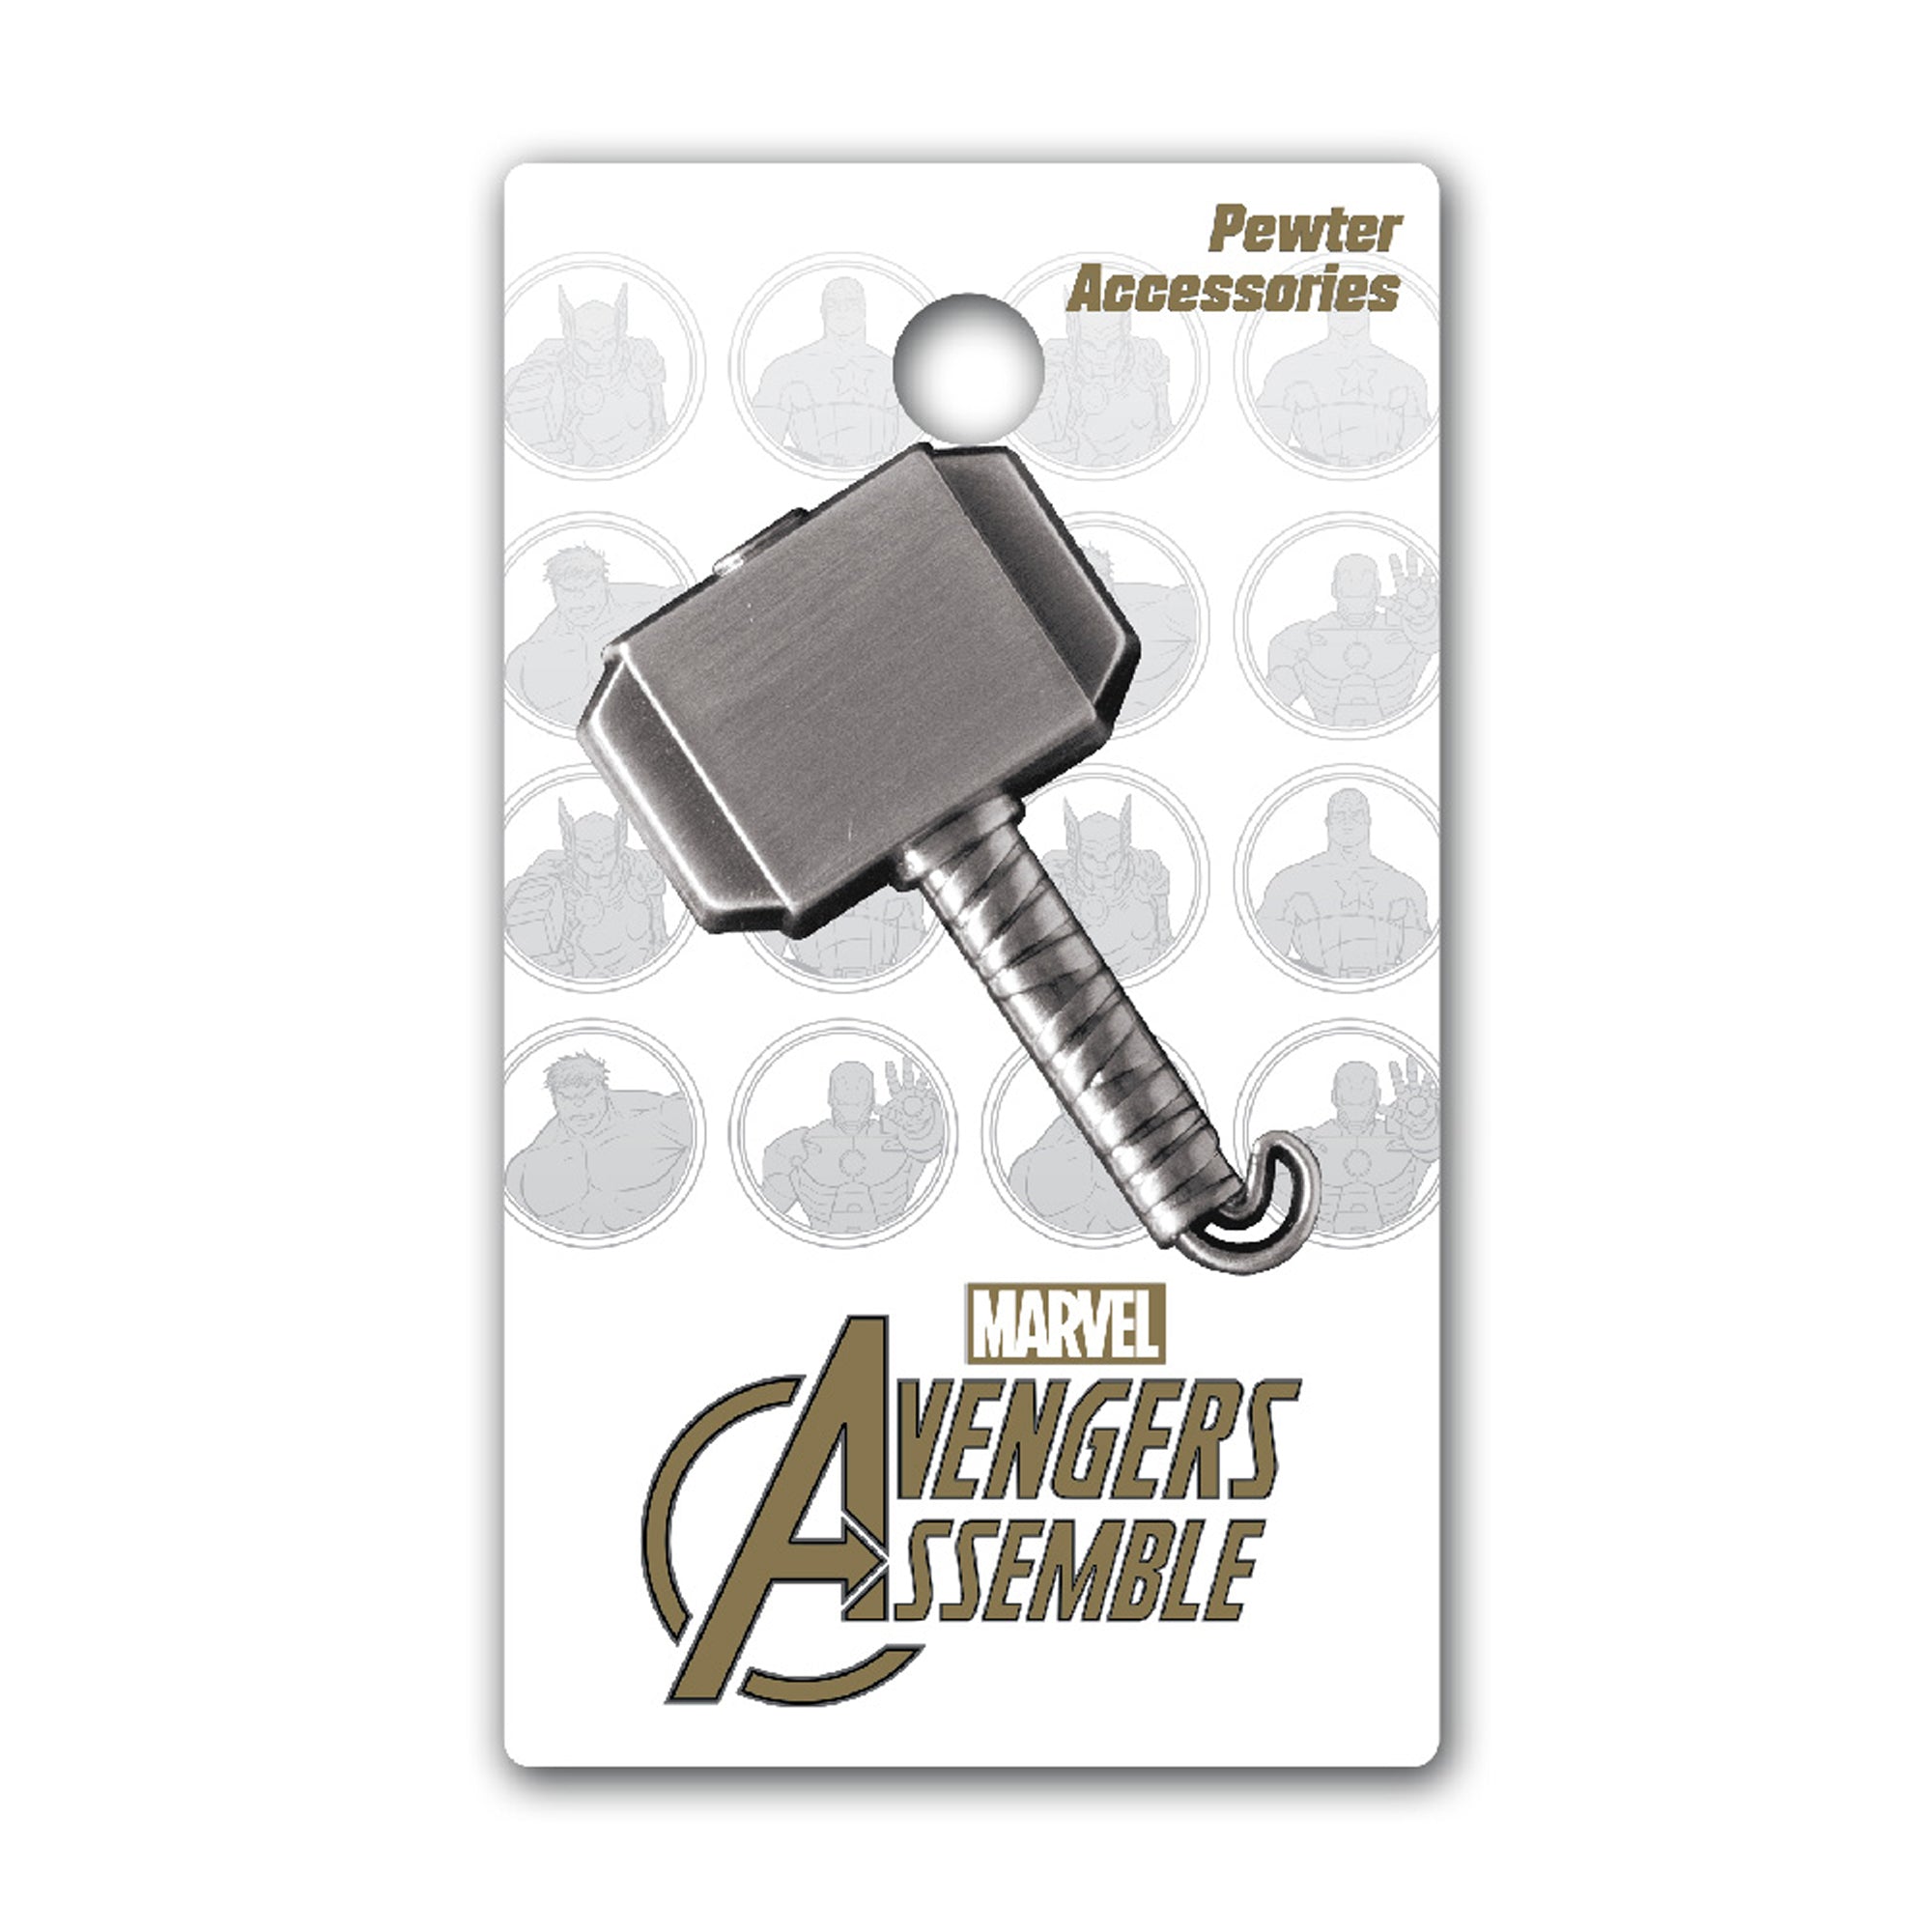 Marvel Thor Hammer Deluxe Collectible Pin